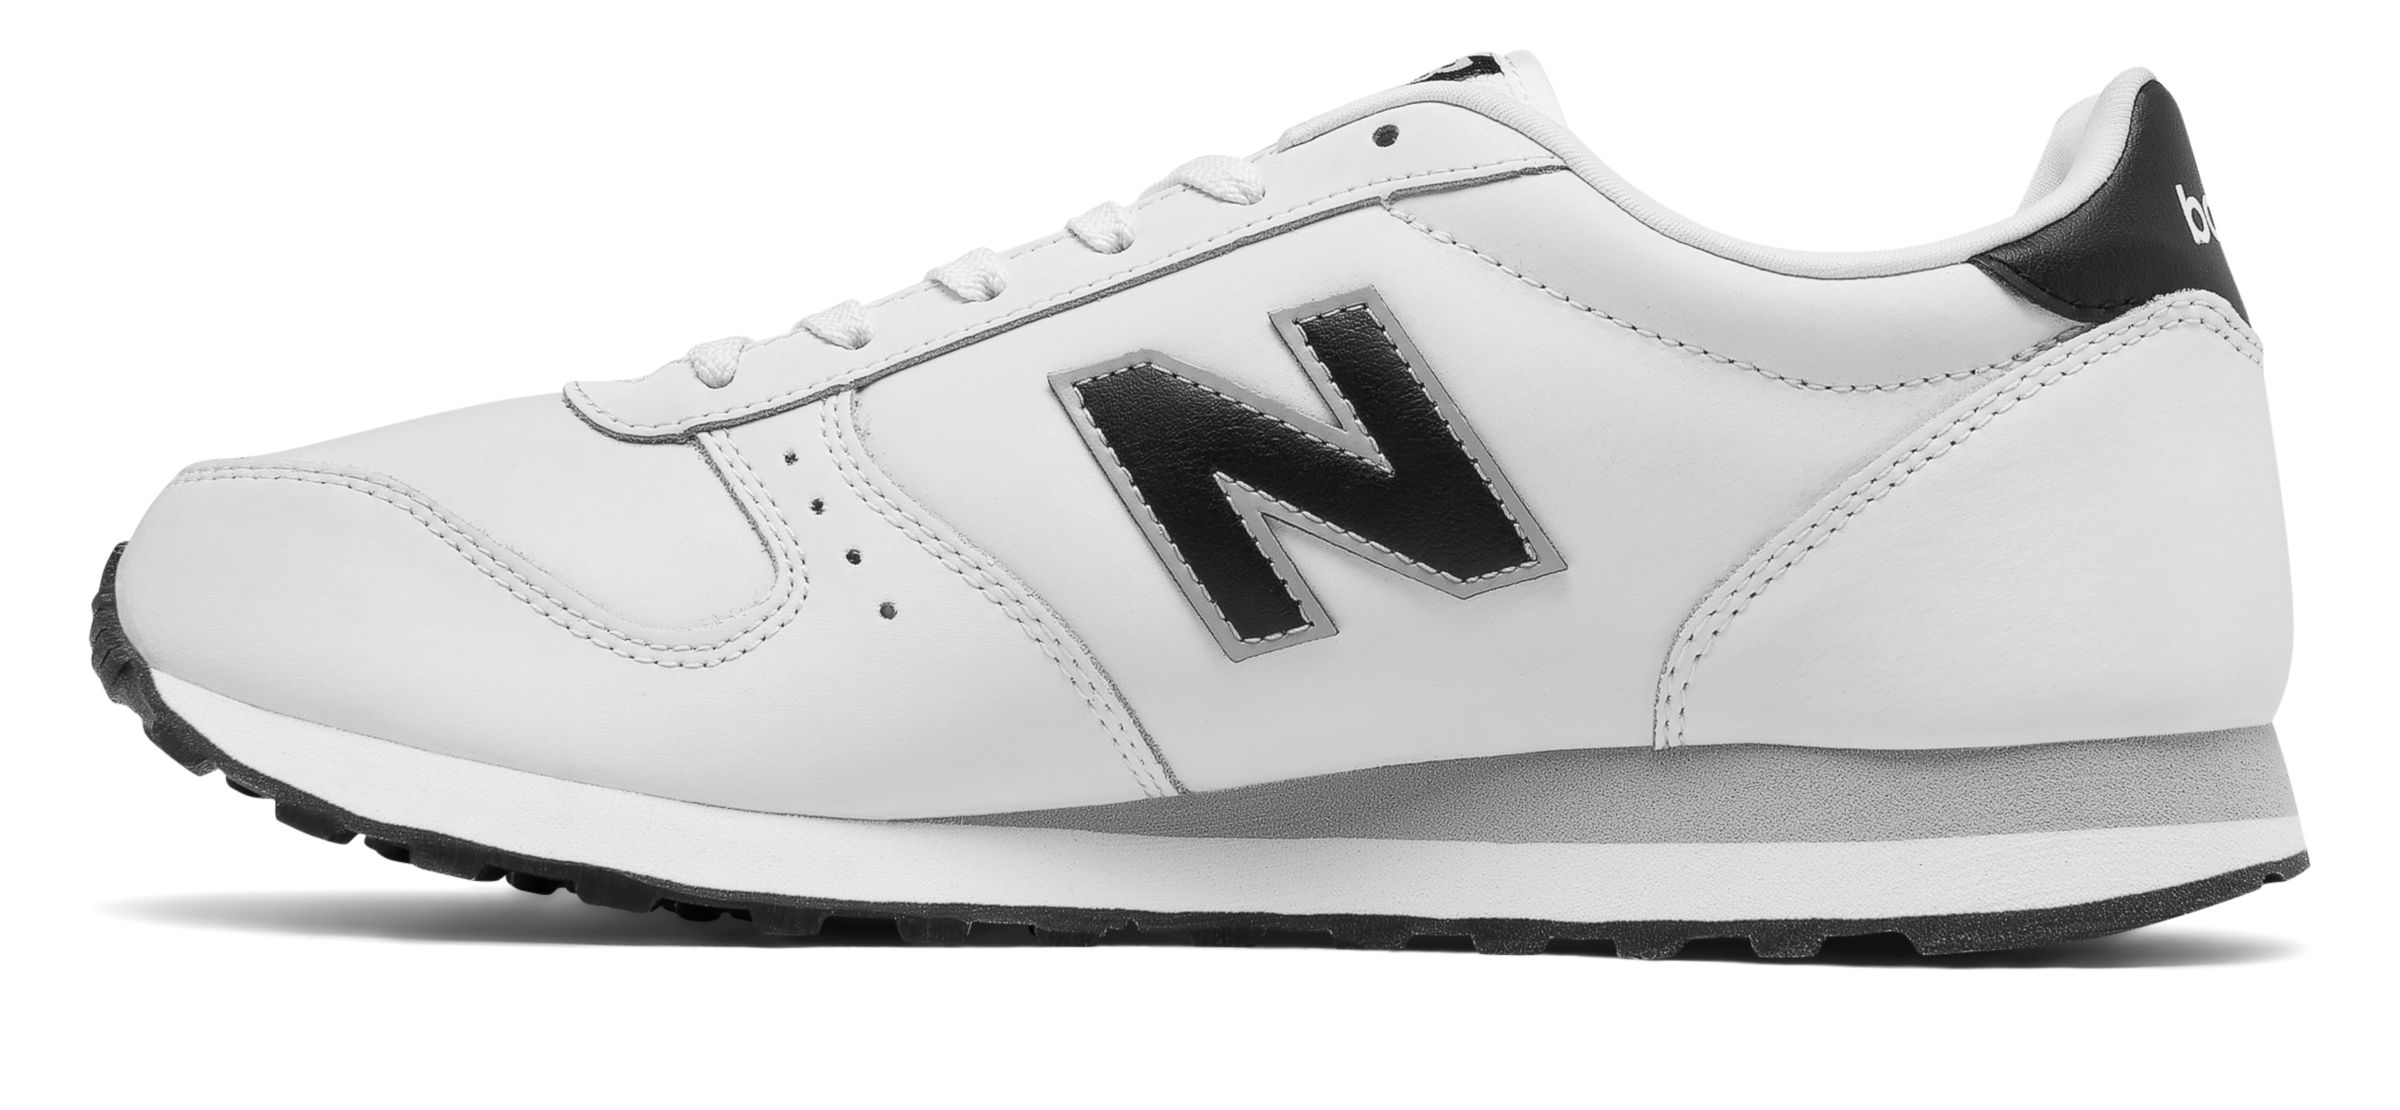 Off on ML311WLK at Joe's New Balance Outlet